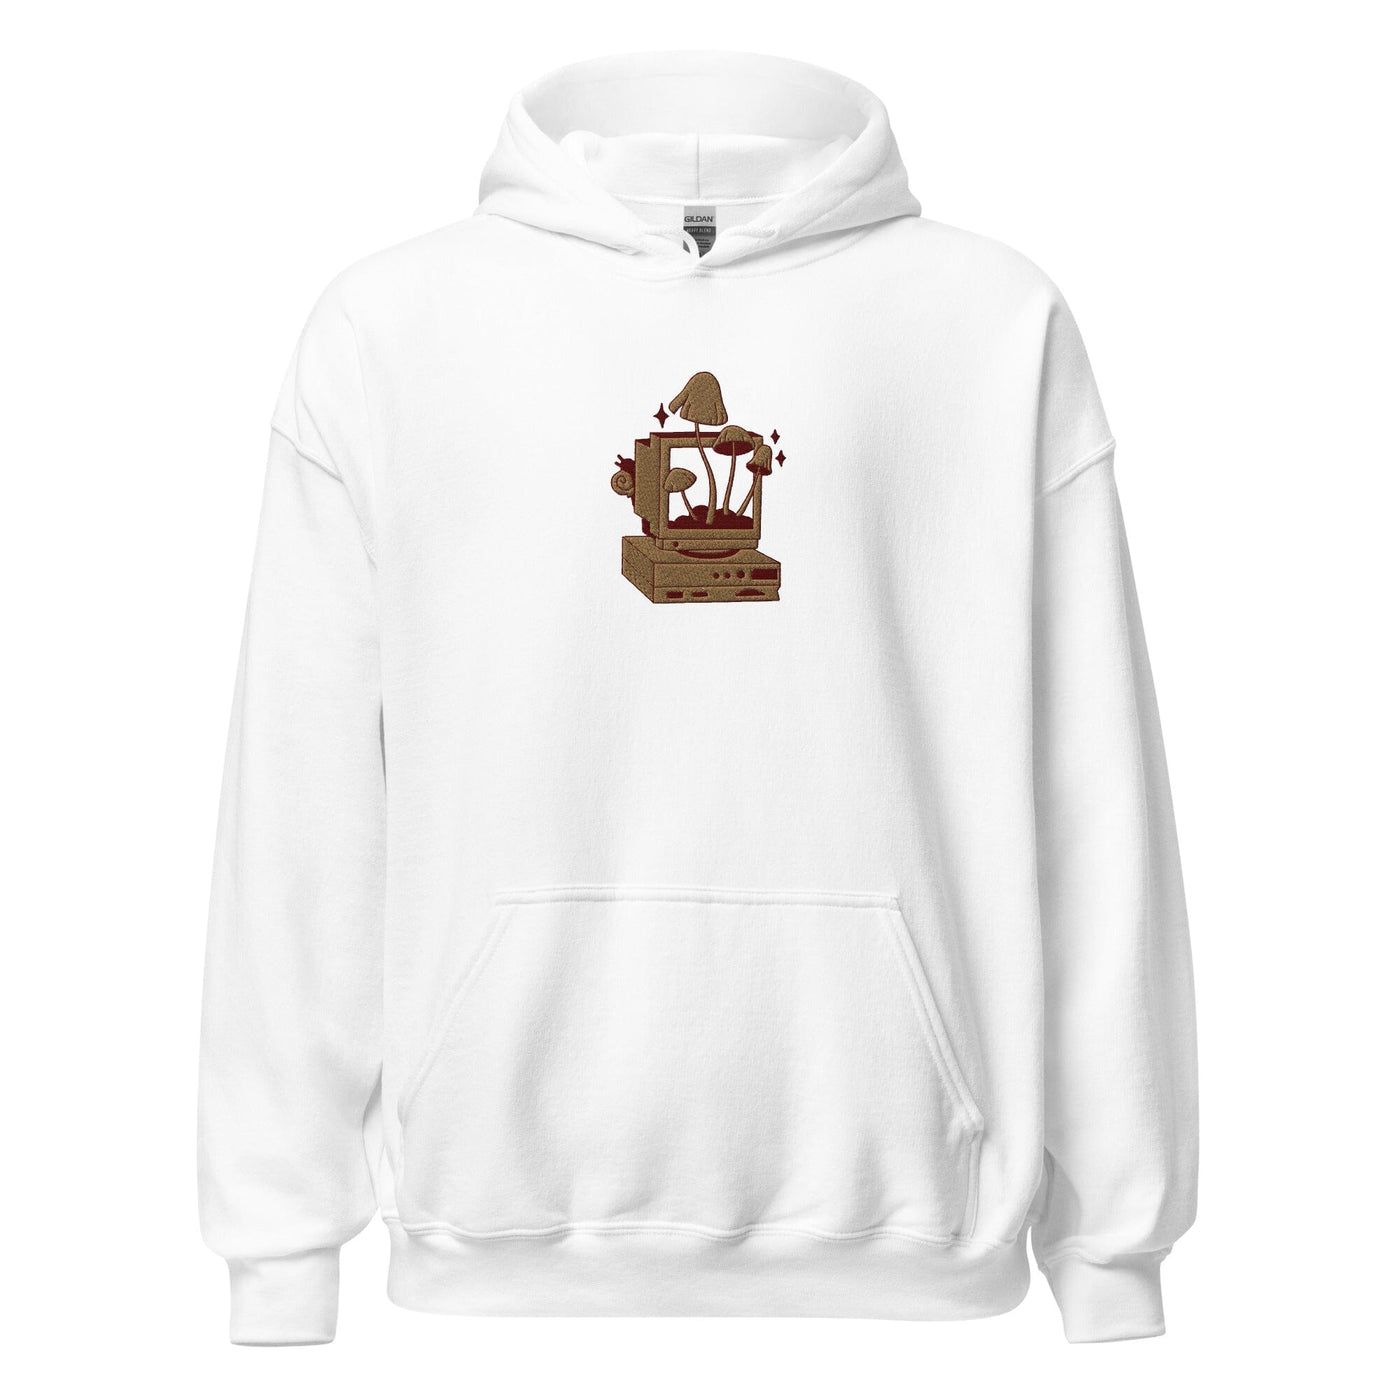 Cozy PC Gaming | Embroidered Unisex Hoodie | Cozy Gamer Threads & Thistles Inventory White S 